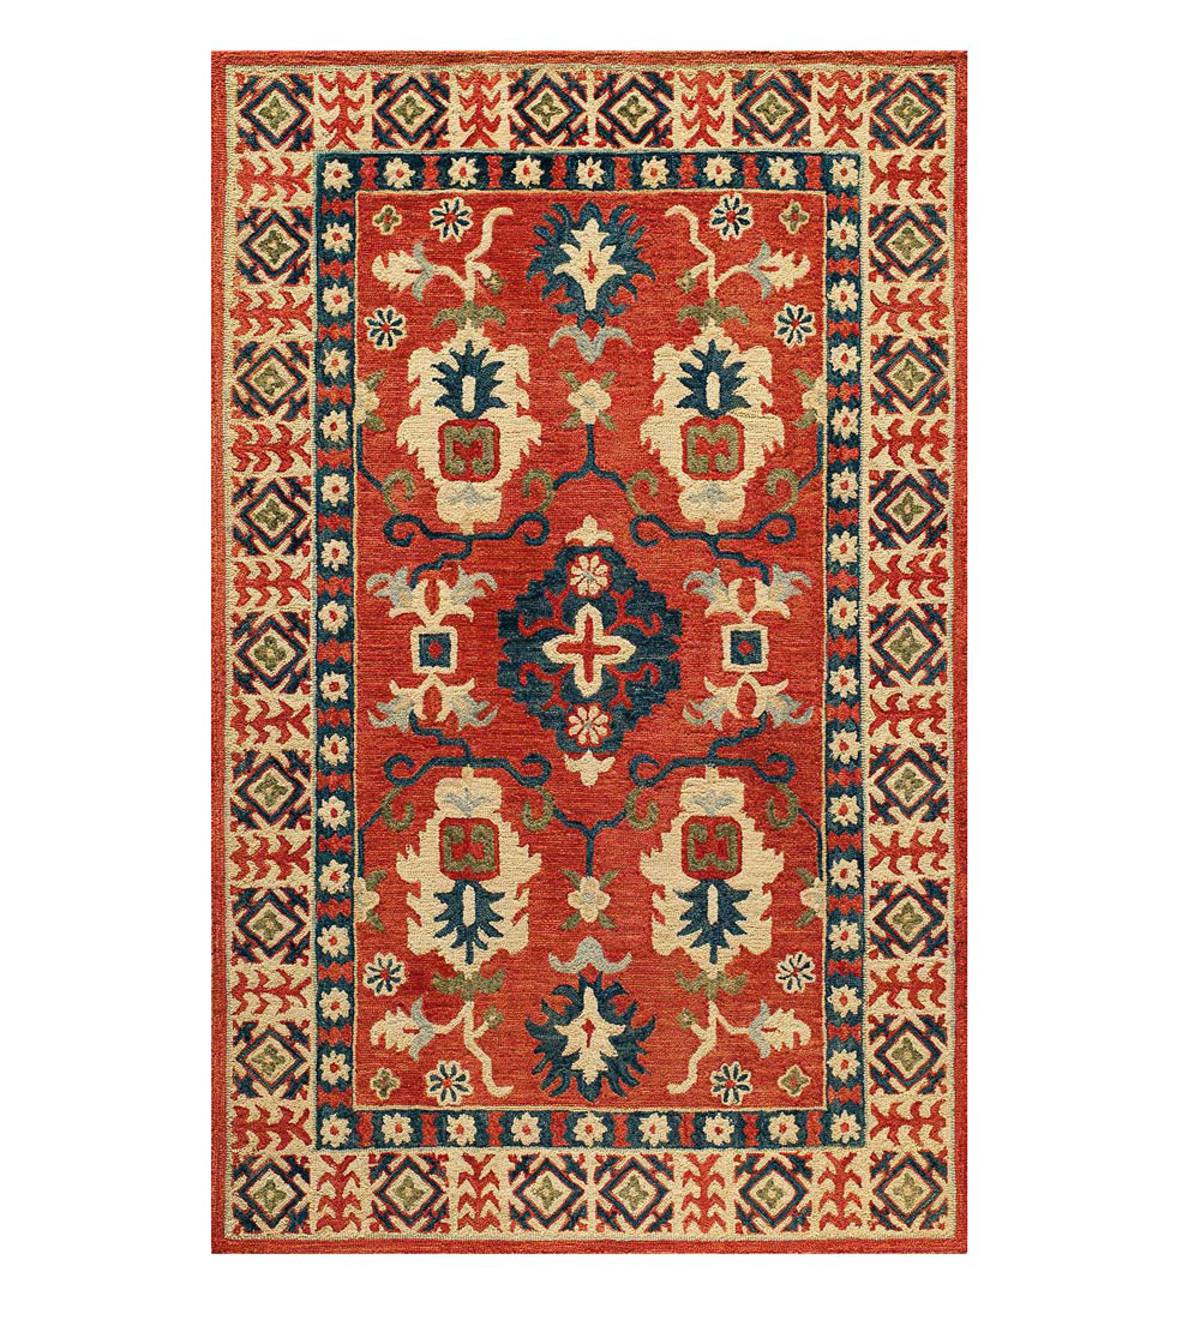 Marketplace Red Wool Rug, 7'6”x 9'6”